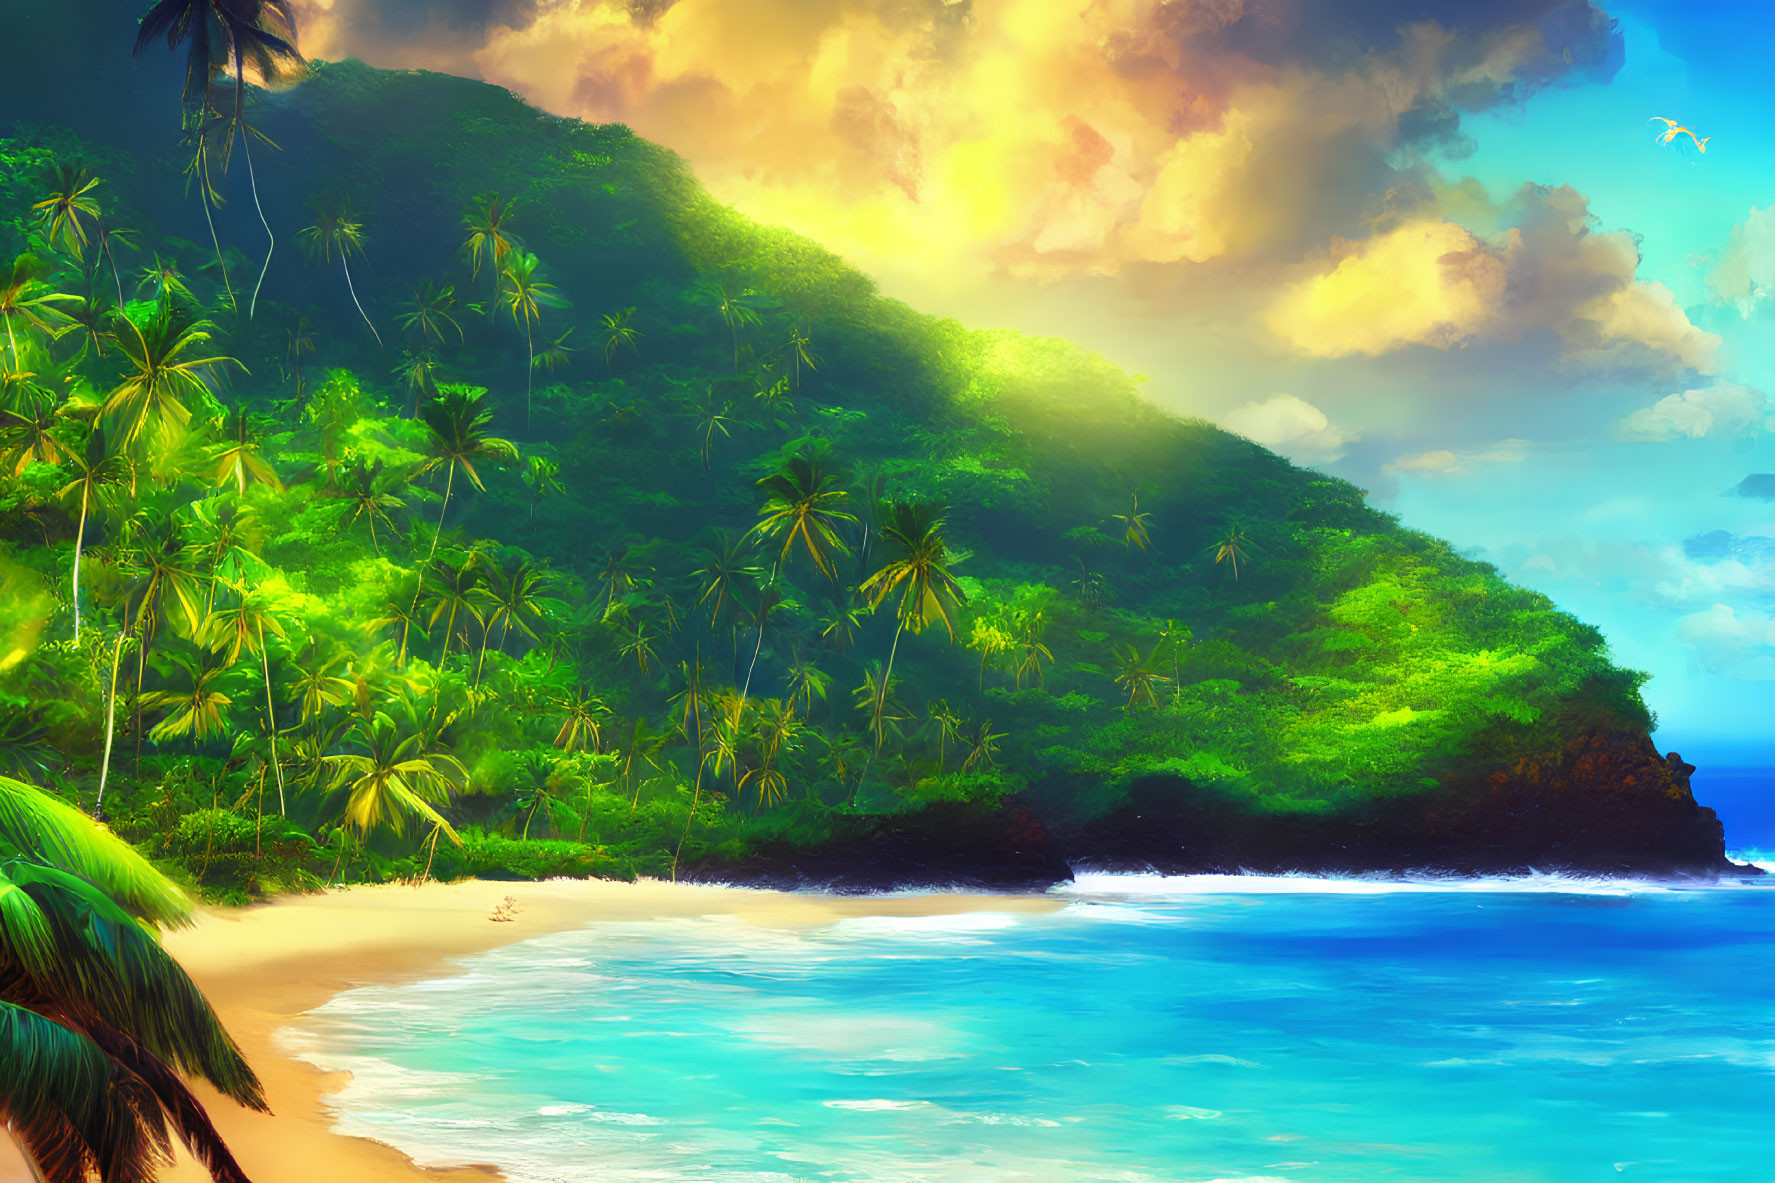 Tropical beach scene with palm trees, golden sand, blue water, and mountain backdrop